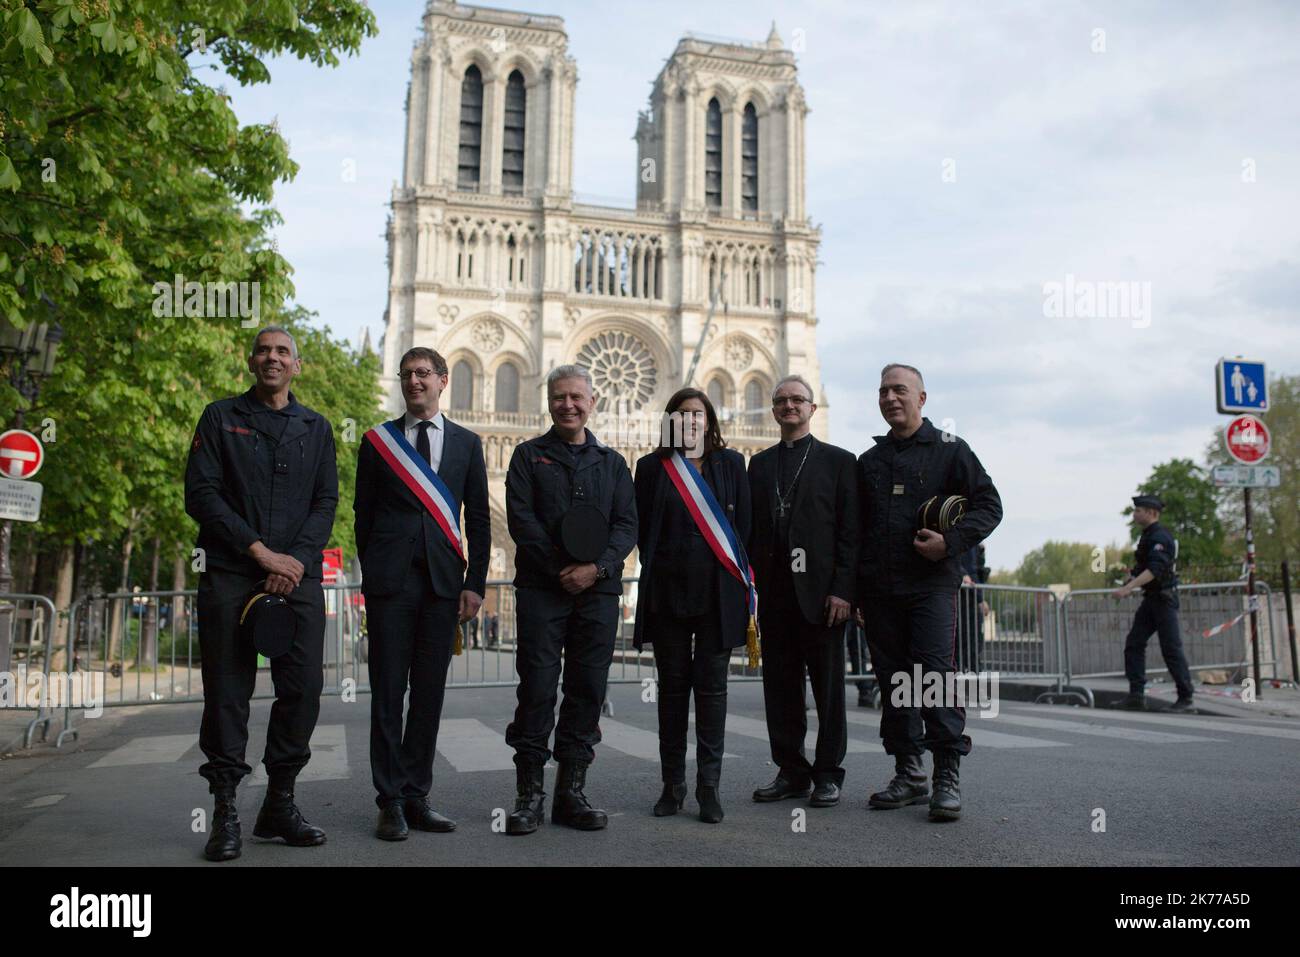 Anne Hidalgo and Firefighters poses for a picture in front of Notre Dame cathedral on April 18, 2019 in Paris. France paid a daylong tribute on April 18, 2019 to the Paris firefighters who saved Notre Dame Cathedral from collapse, while construction workers rushed to secure an area above one of the church's famed rose-shaped windows and other vulnerable sections of the fire-damaged landmark  Stock Photo